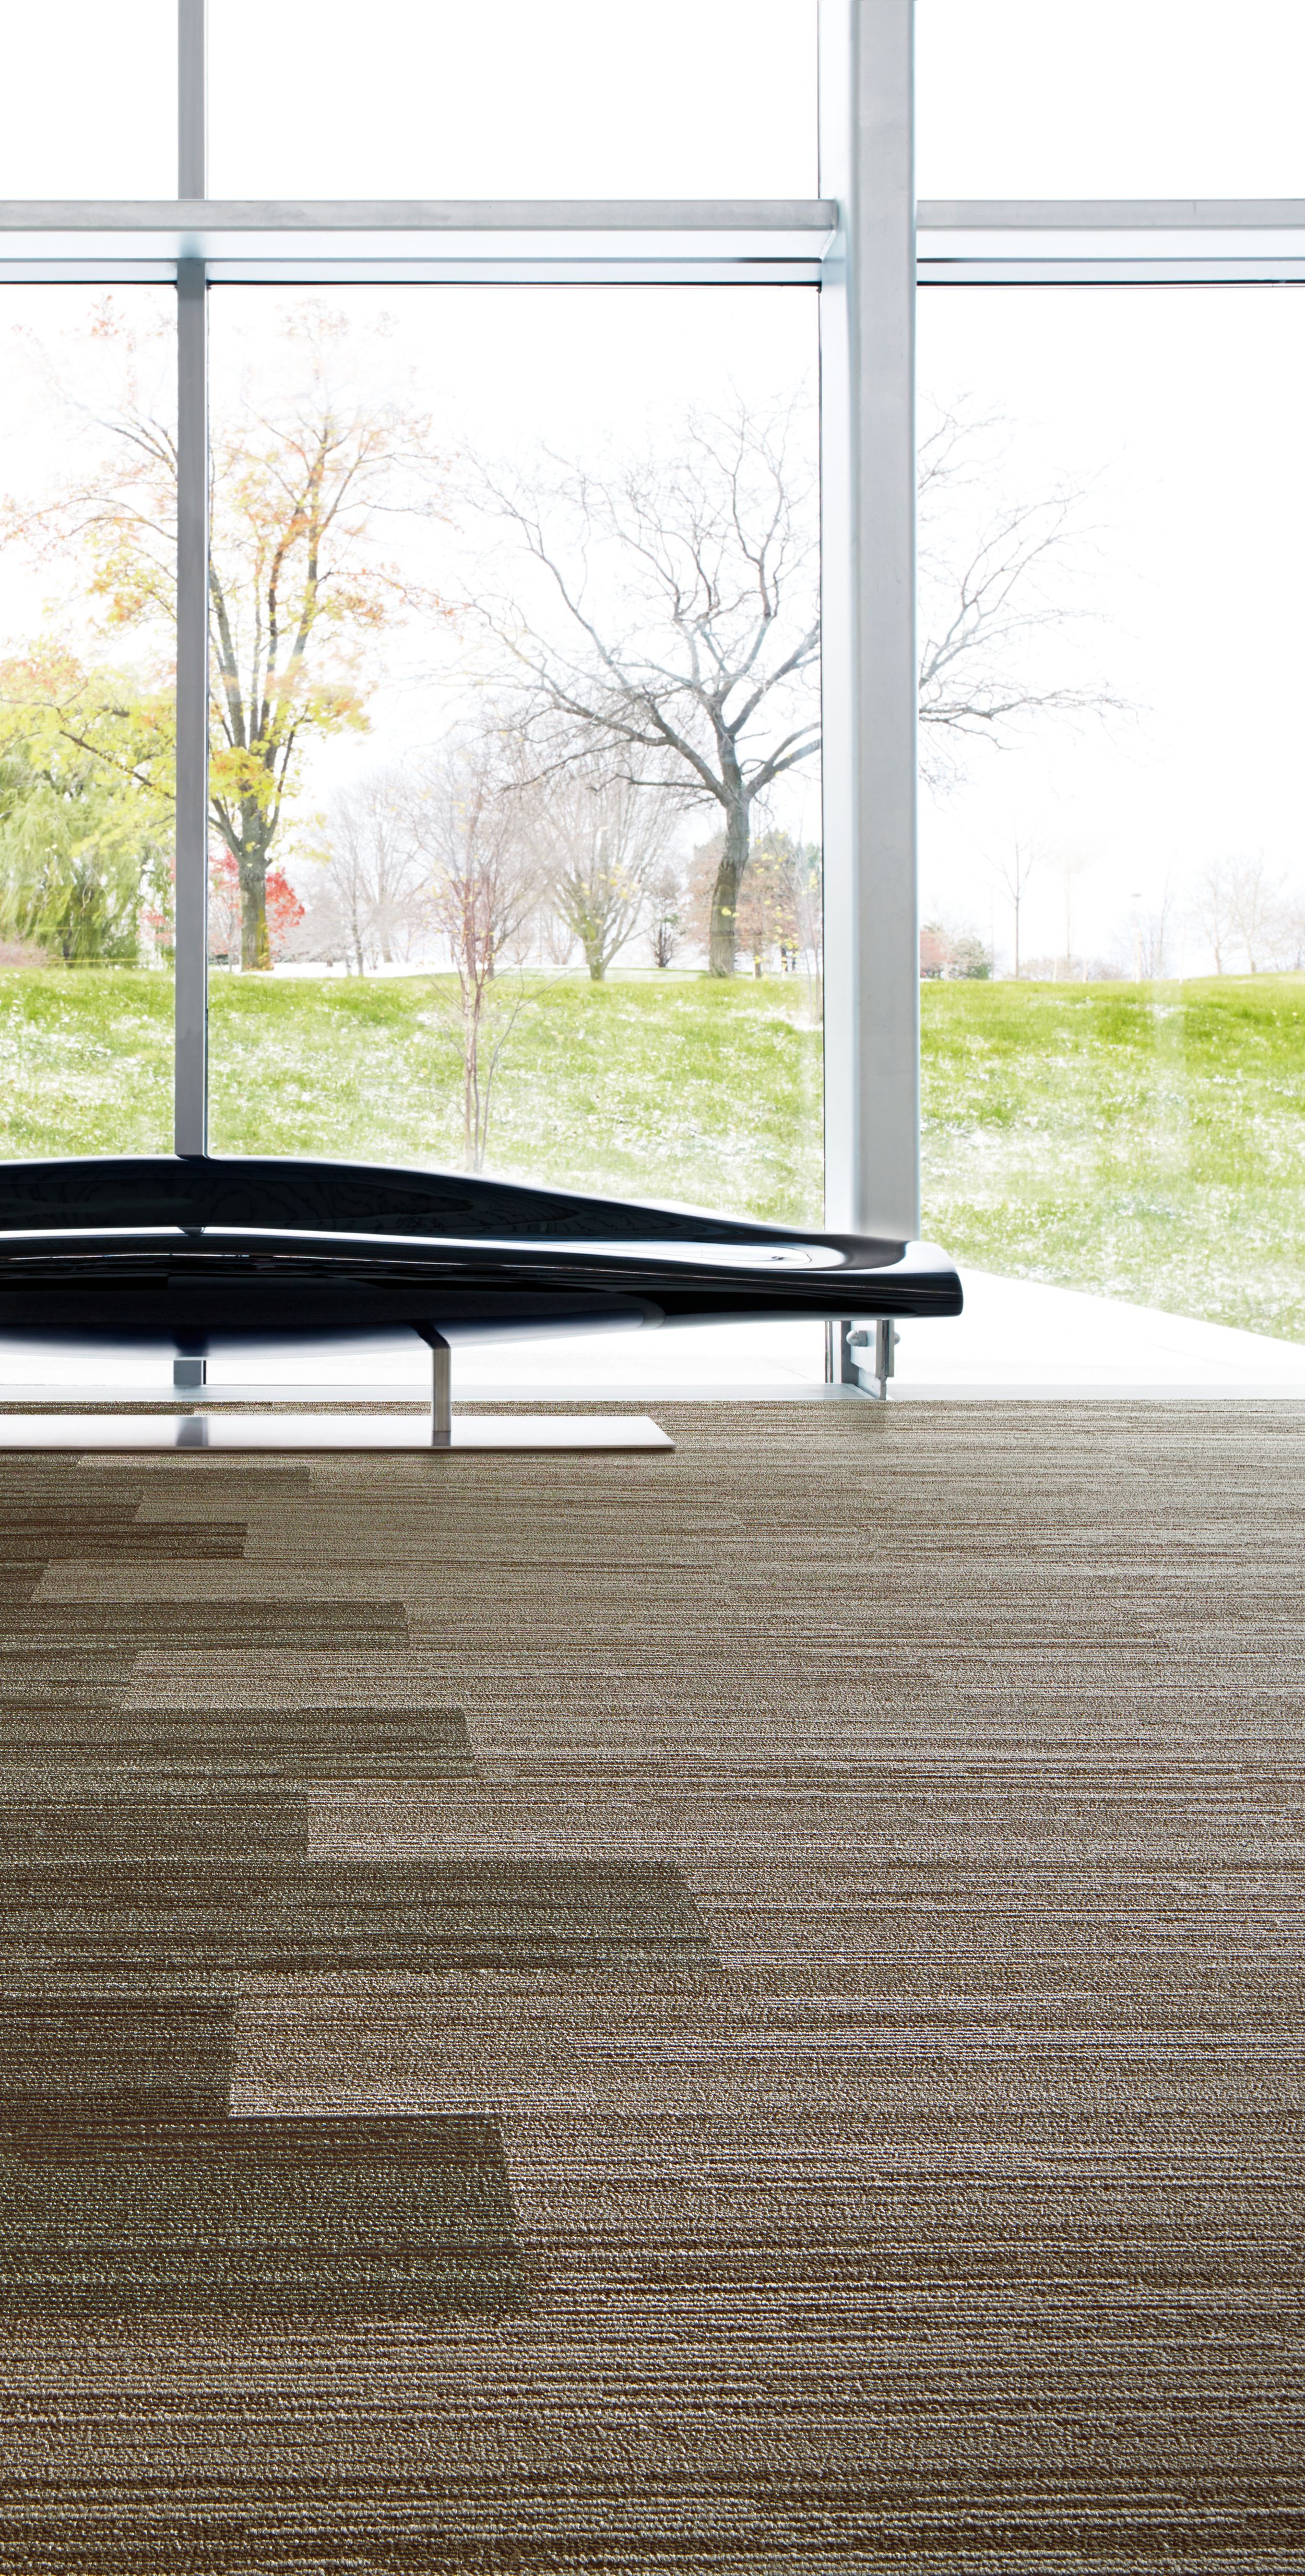 Interface Progression III plank carpet tile in room with seating area by window image number 9